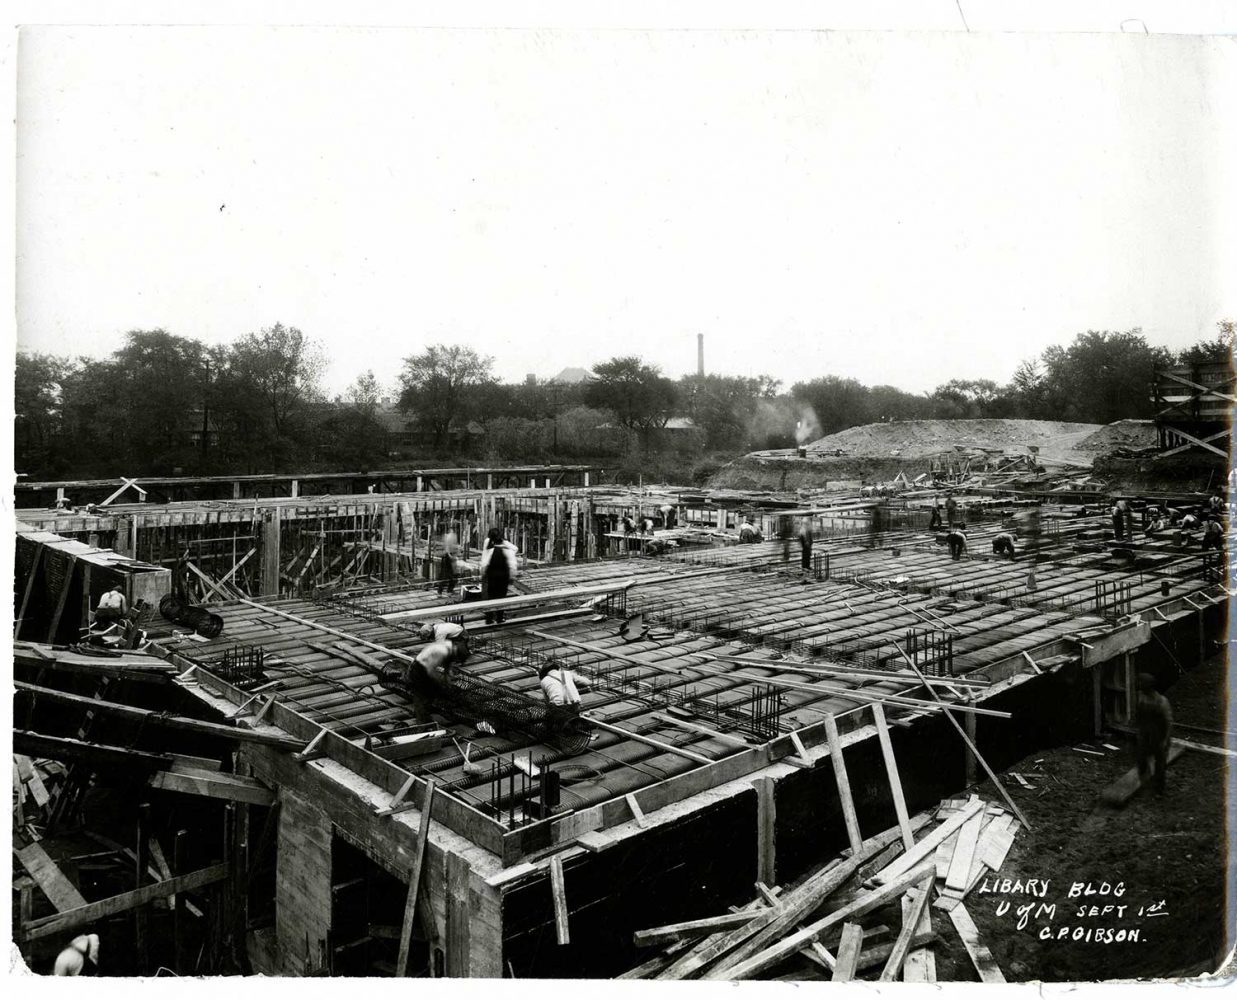 construction of Walter Library begins.